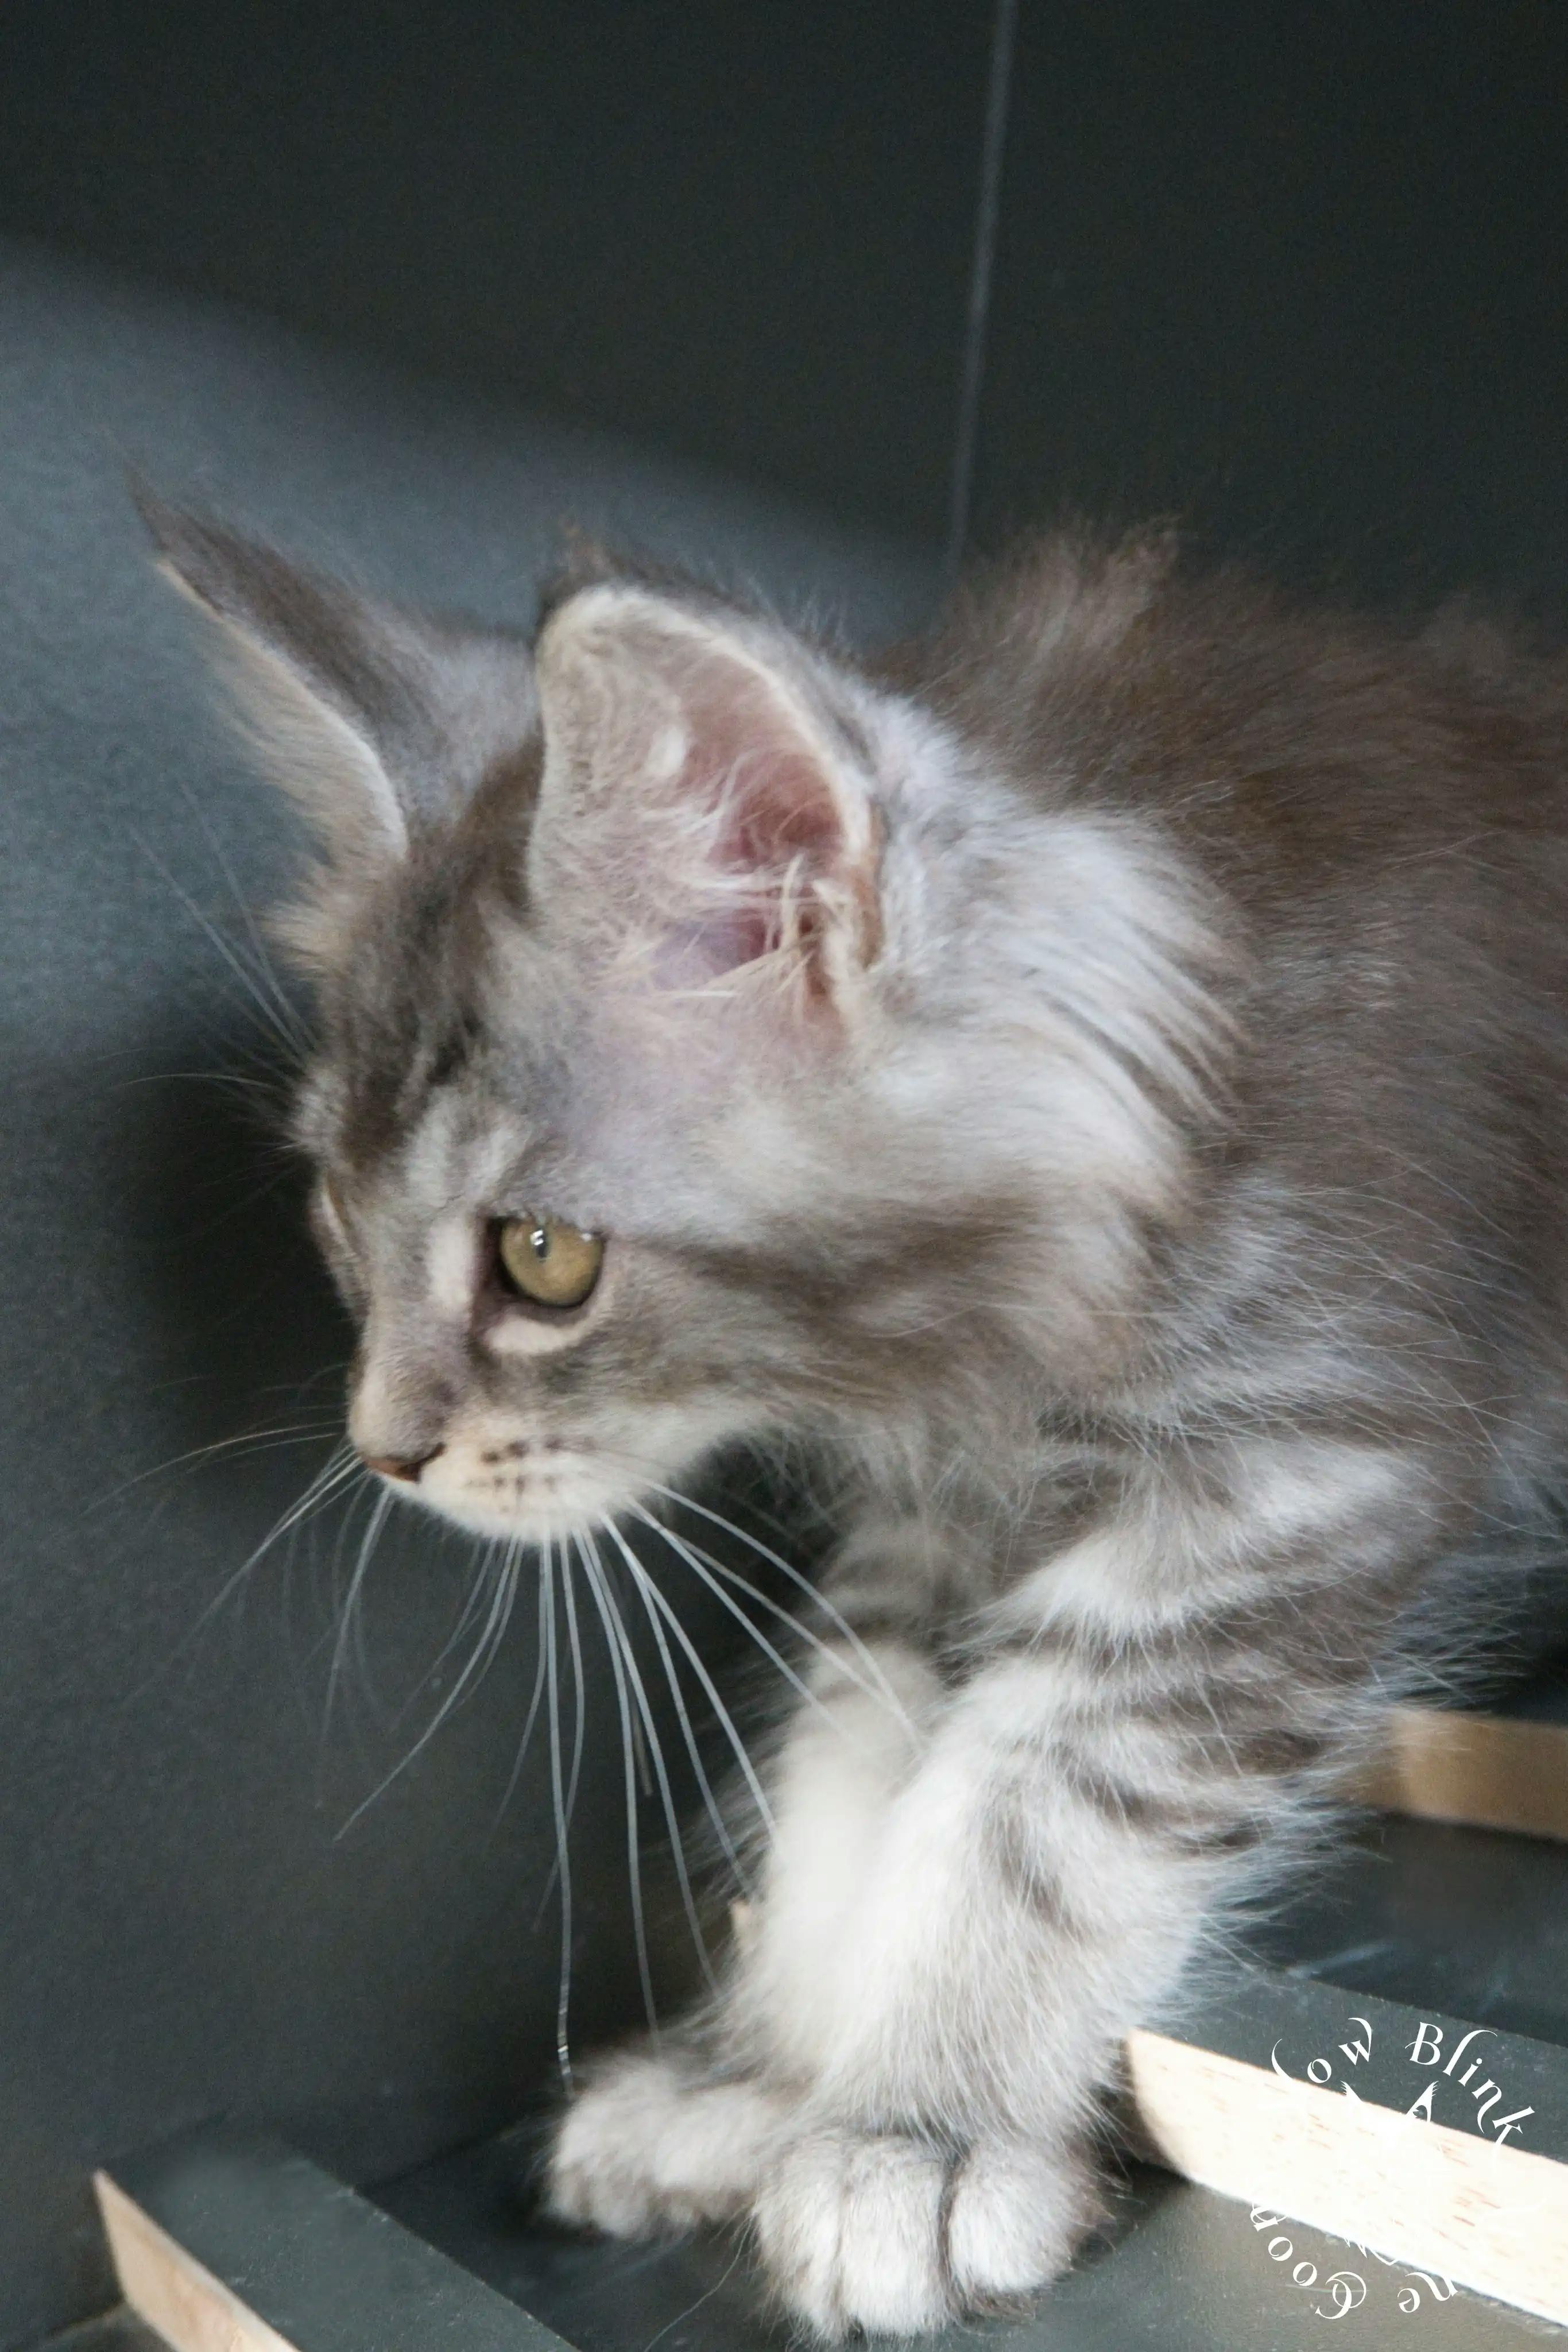 Blue Silver Tabby Maine Coon Kittens > blue silver tabby maine coon kitten | slowblinkmainecoons | 523